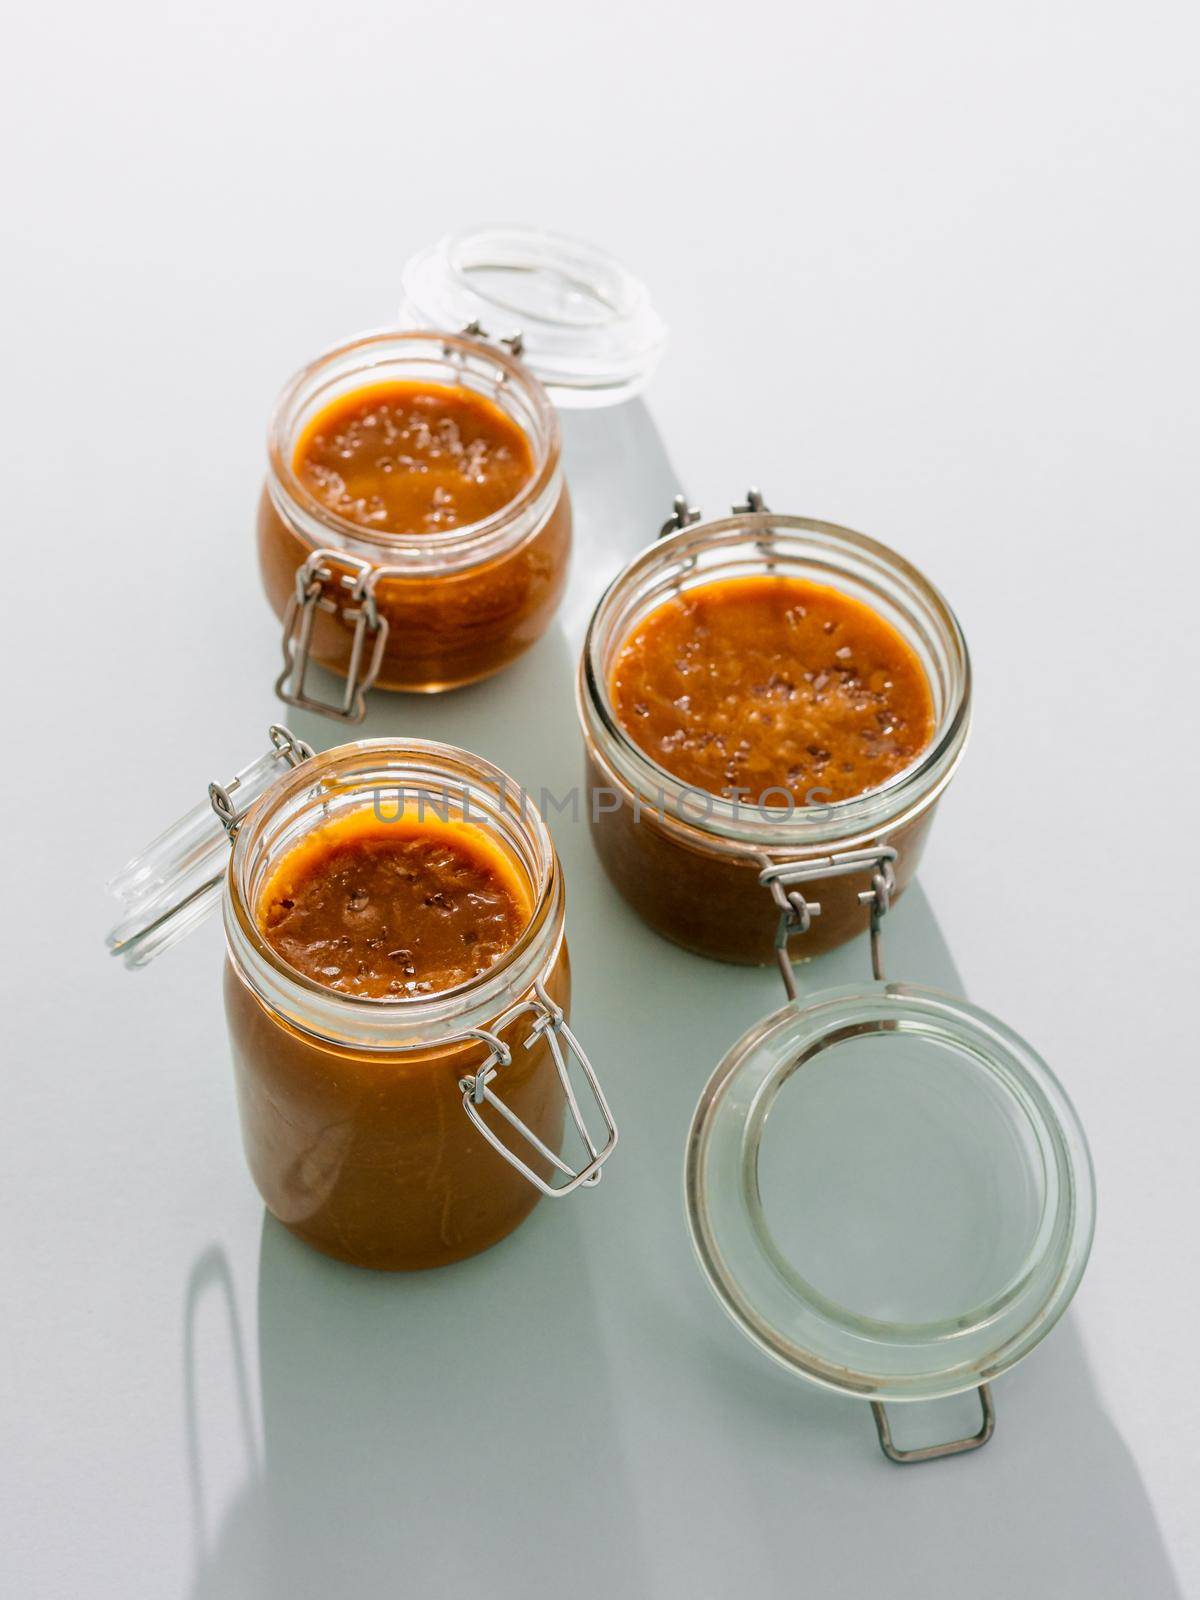 Salted caramel in glass jars. Brown caramel or condensed milk with sea salt crystalls, shoot in bright or hard light. Light neutral background. Vertical